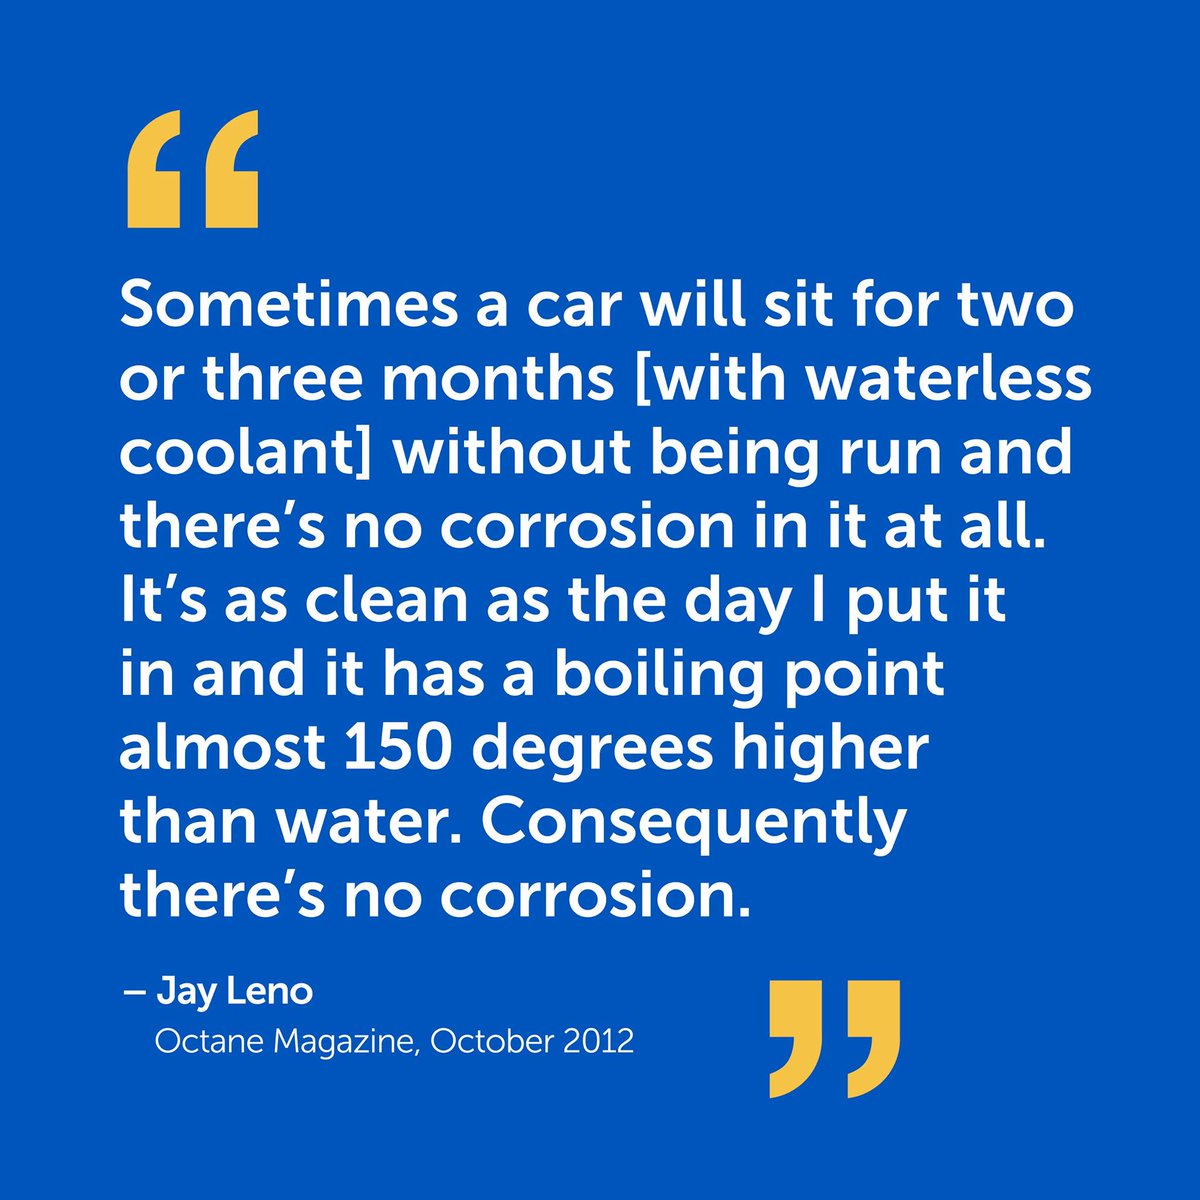 #GoWaterless #ProtectYourEngine #evanswaterless #coolant #longlife #nontoxic #nocorrosion #cars #motorbike #quads #classiccars #boats #findoutmore

evanscoolants.co.uk